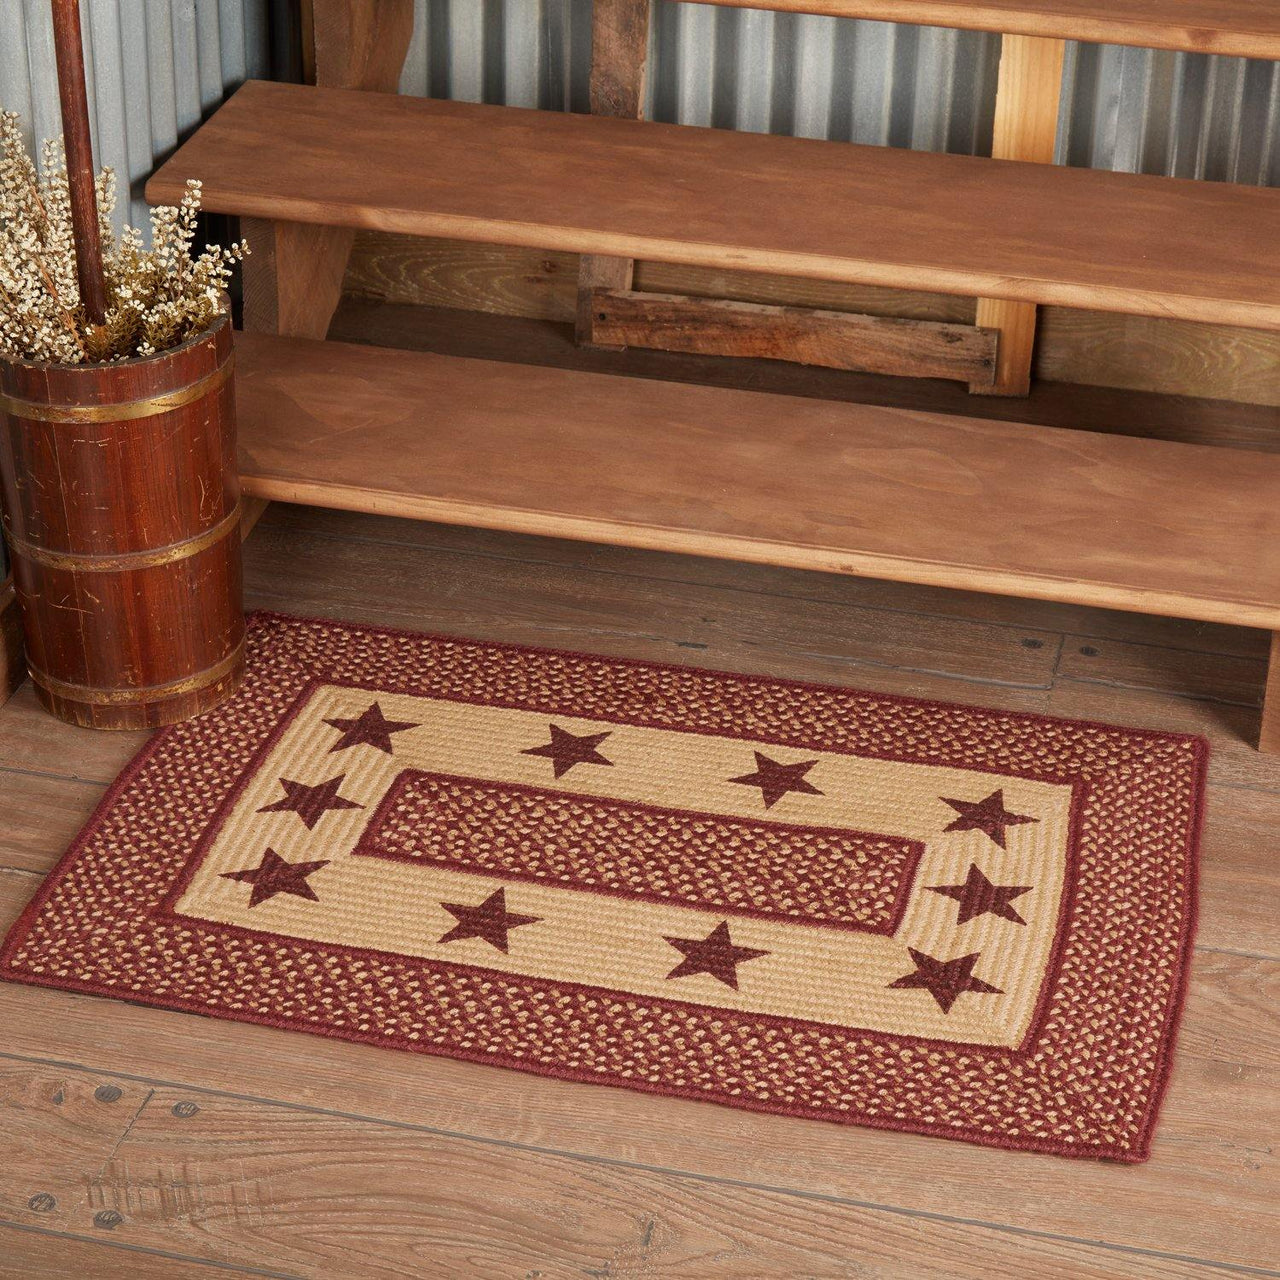 Burgundy Red Primitive Jute Braided Rug Rect Stencil Stars 20"x30" with Rug Pad VHC Brands - The Fox Decor